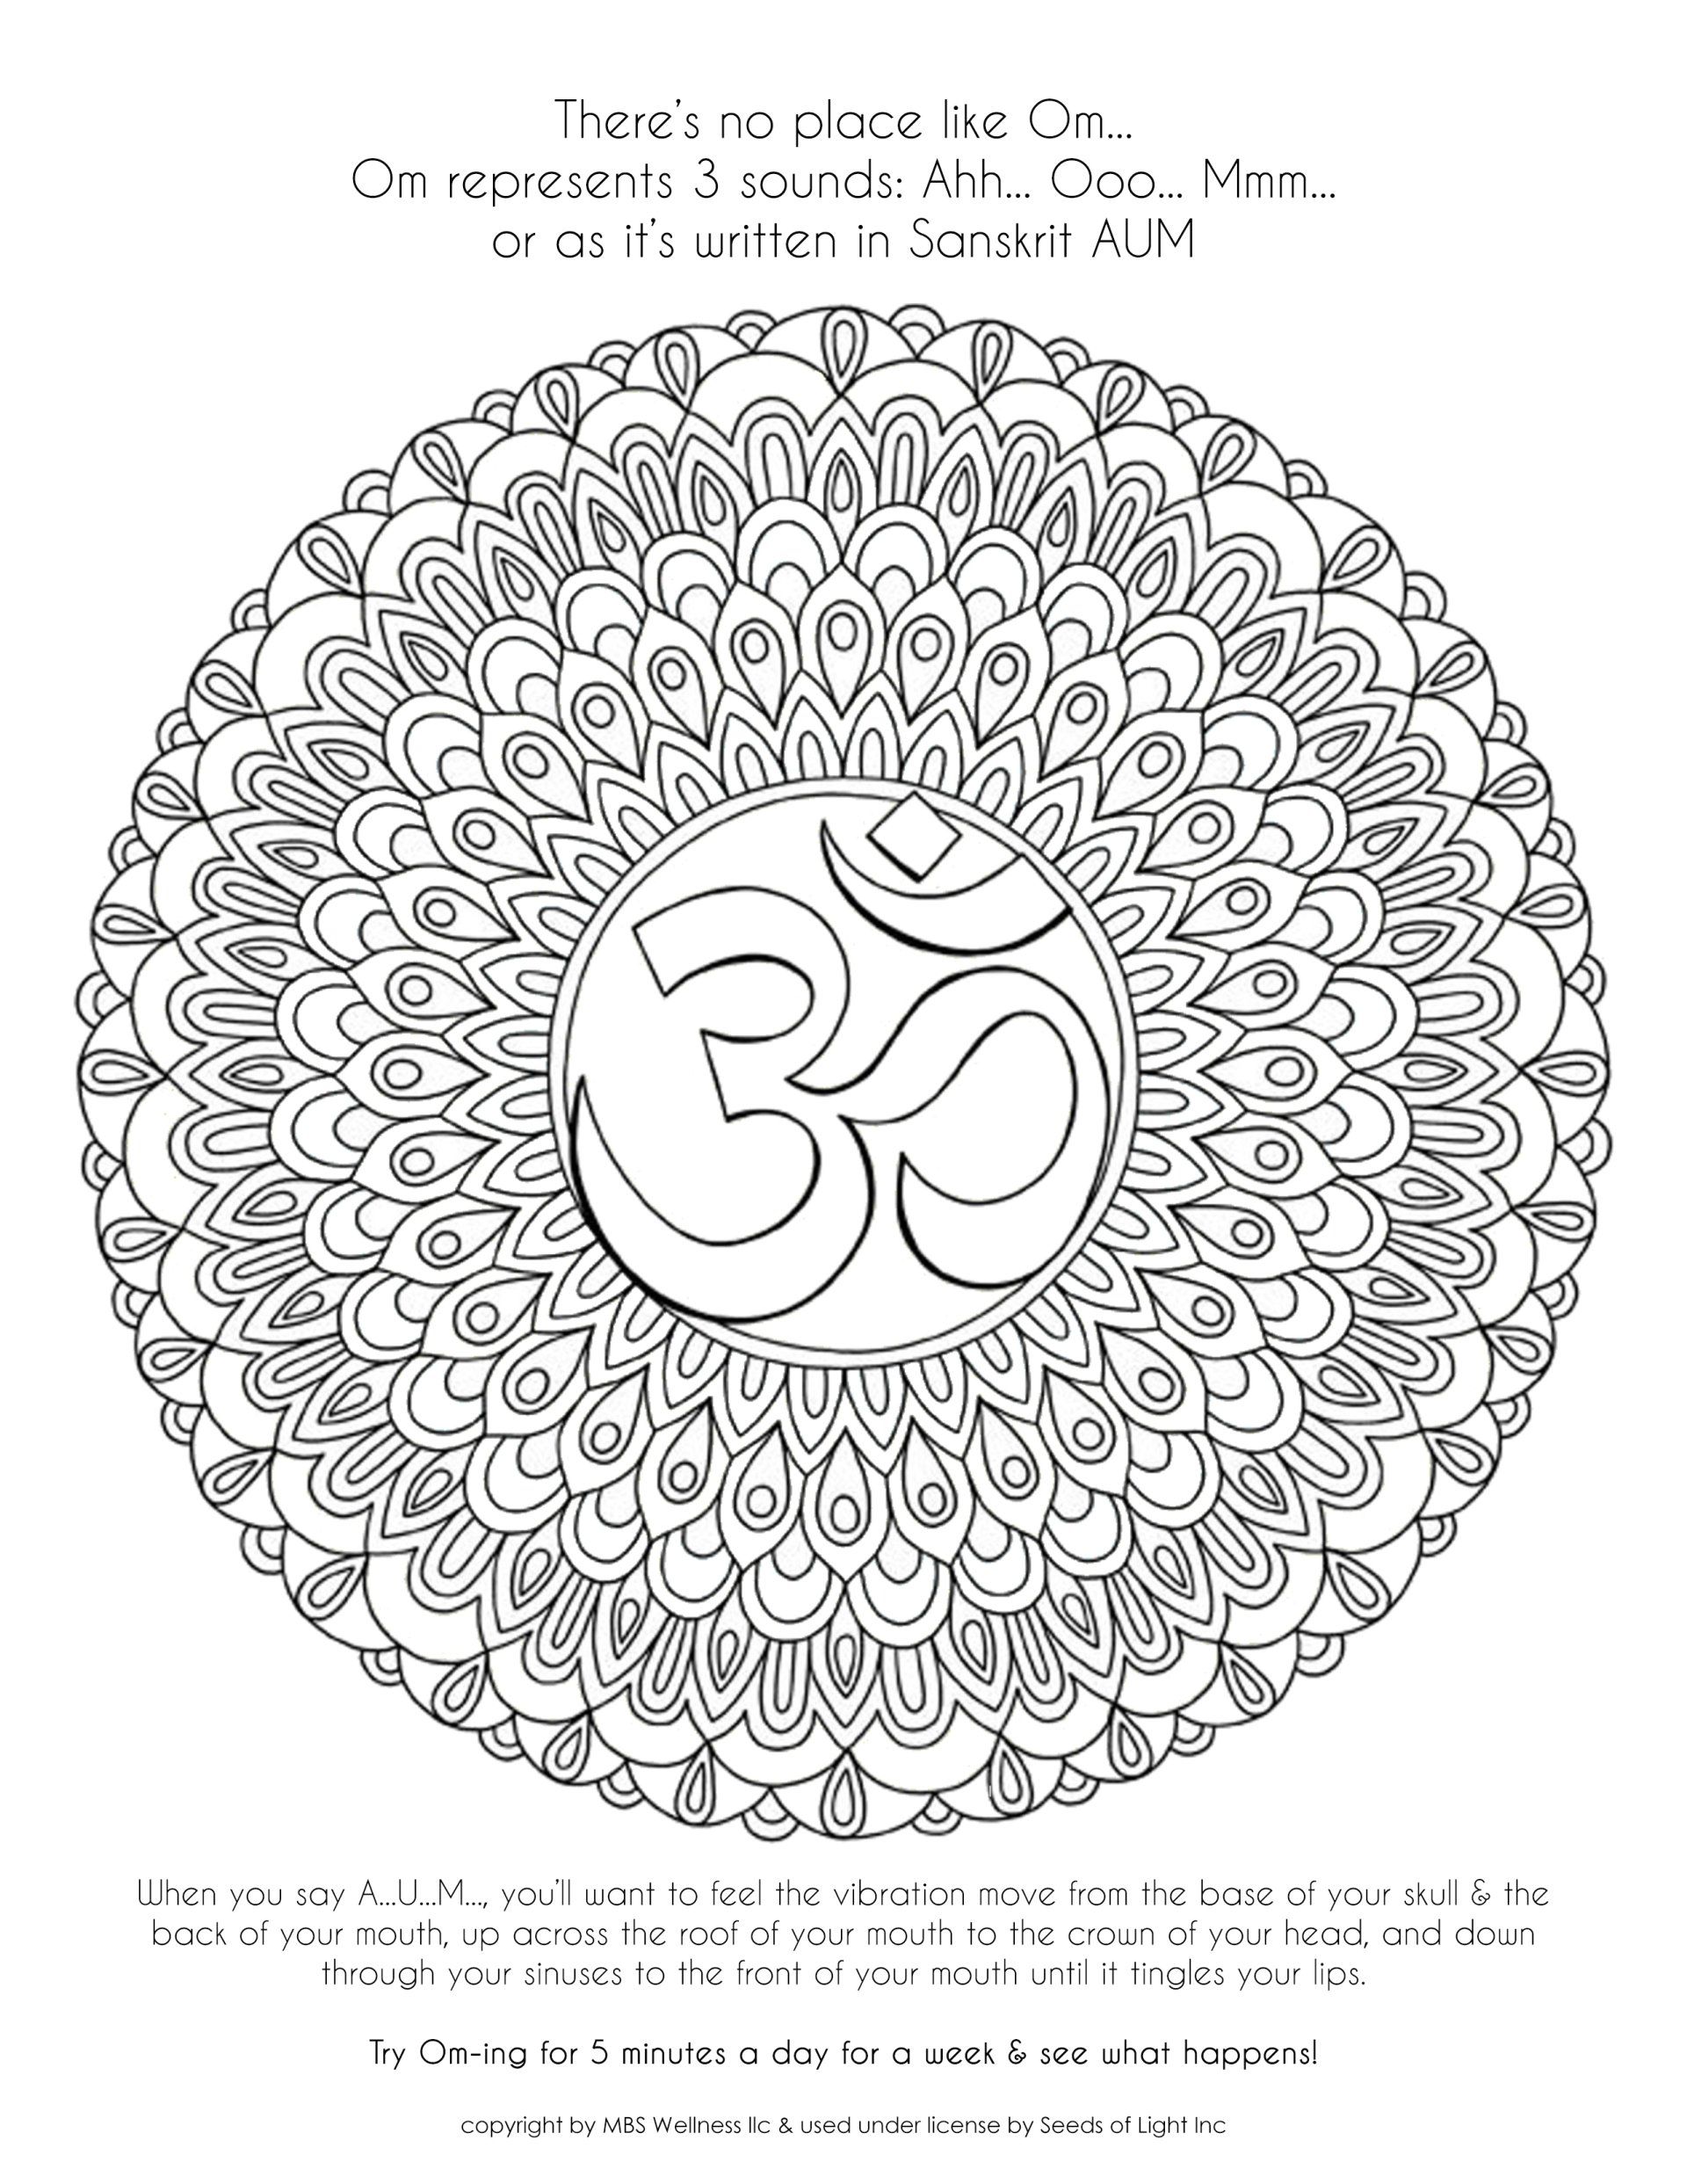 downloadable coloring page with Sanskrit Om symbol in the center of a mandala